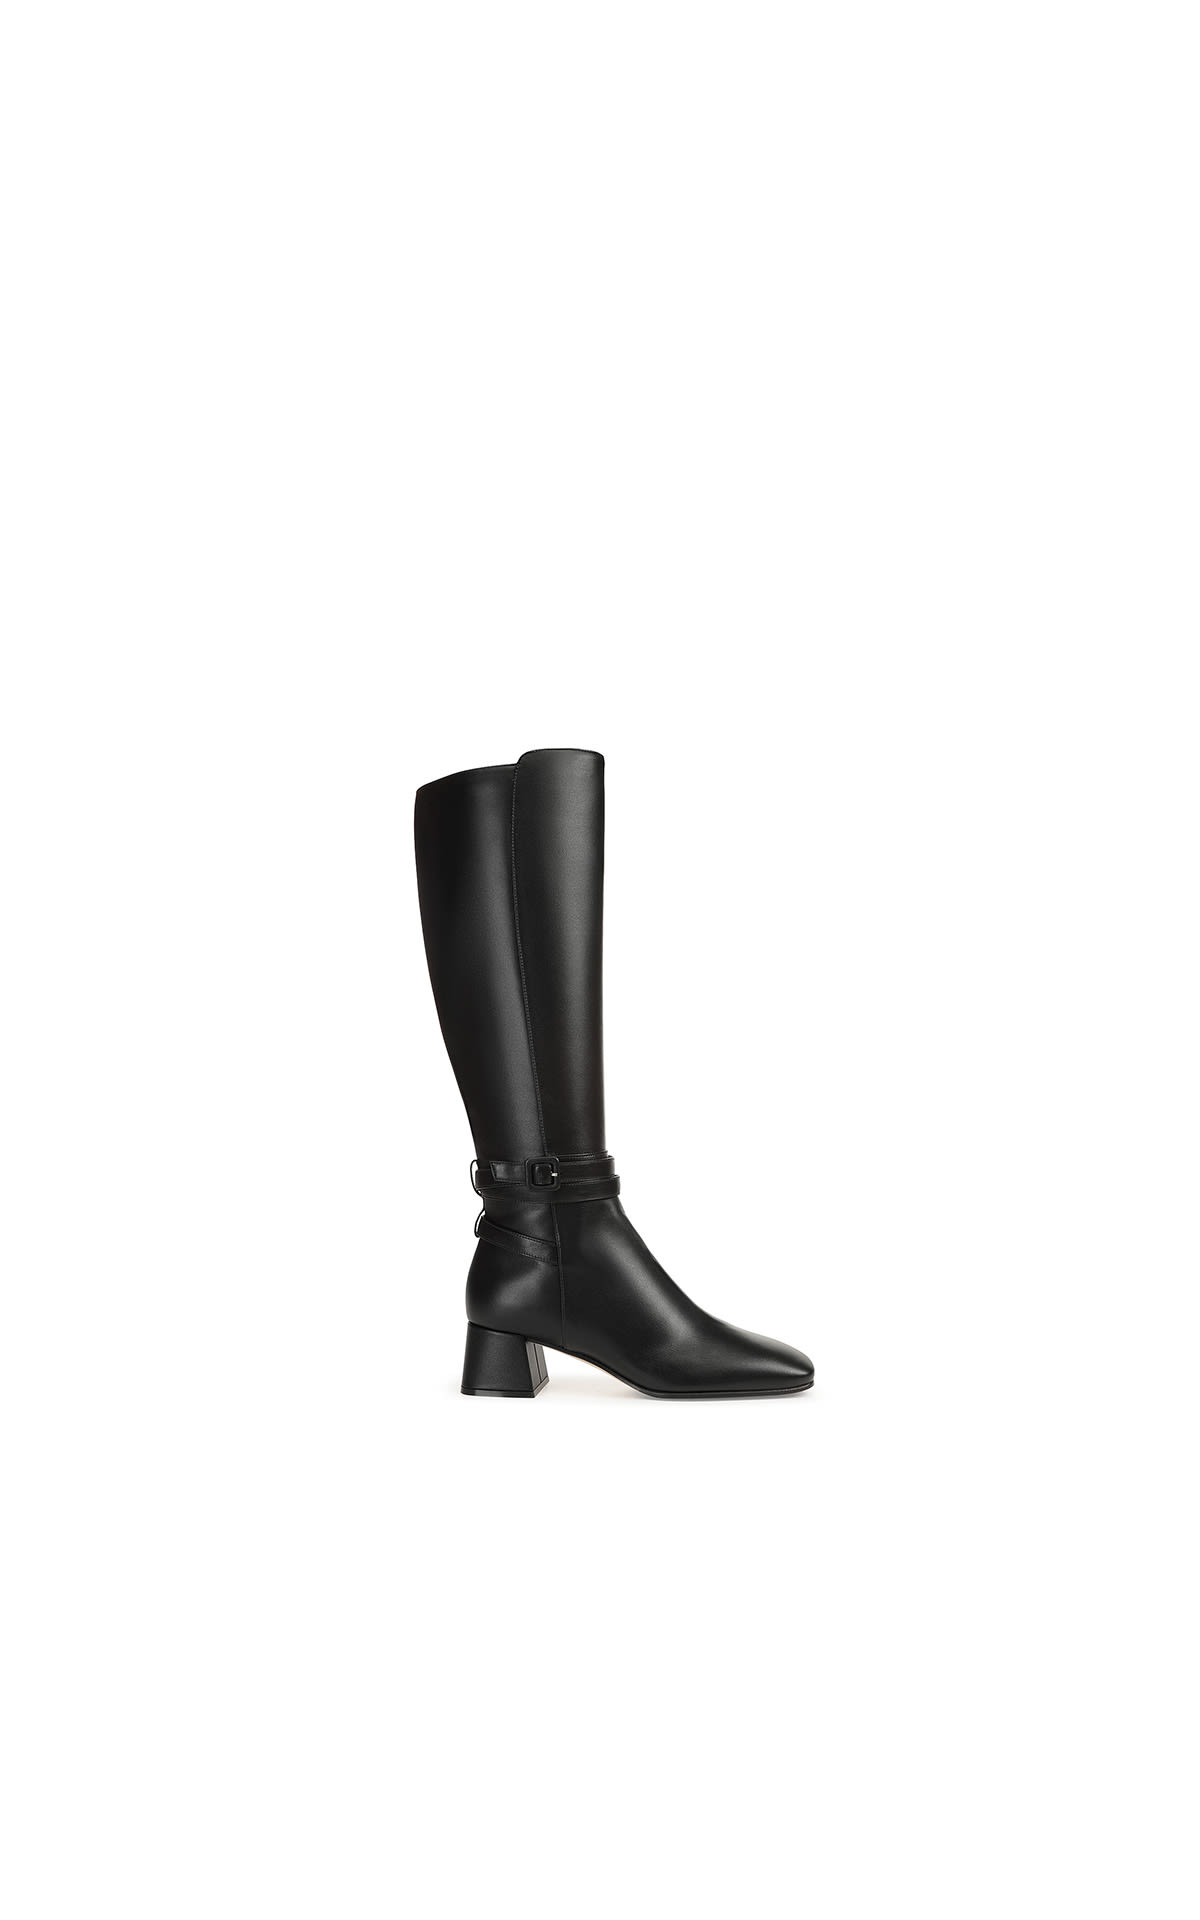 Sergio Rossi Black leather boots with buckle and square toe